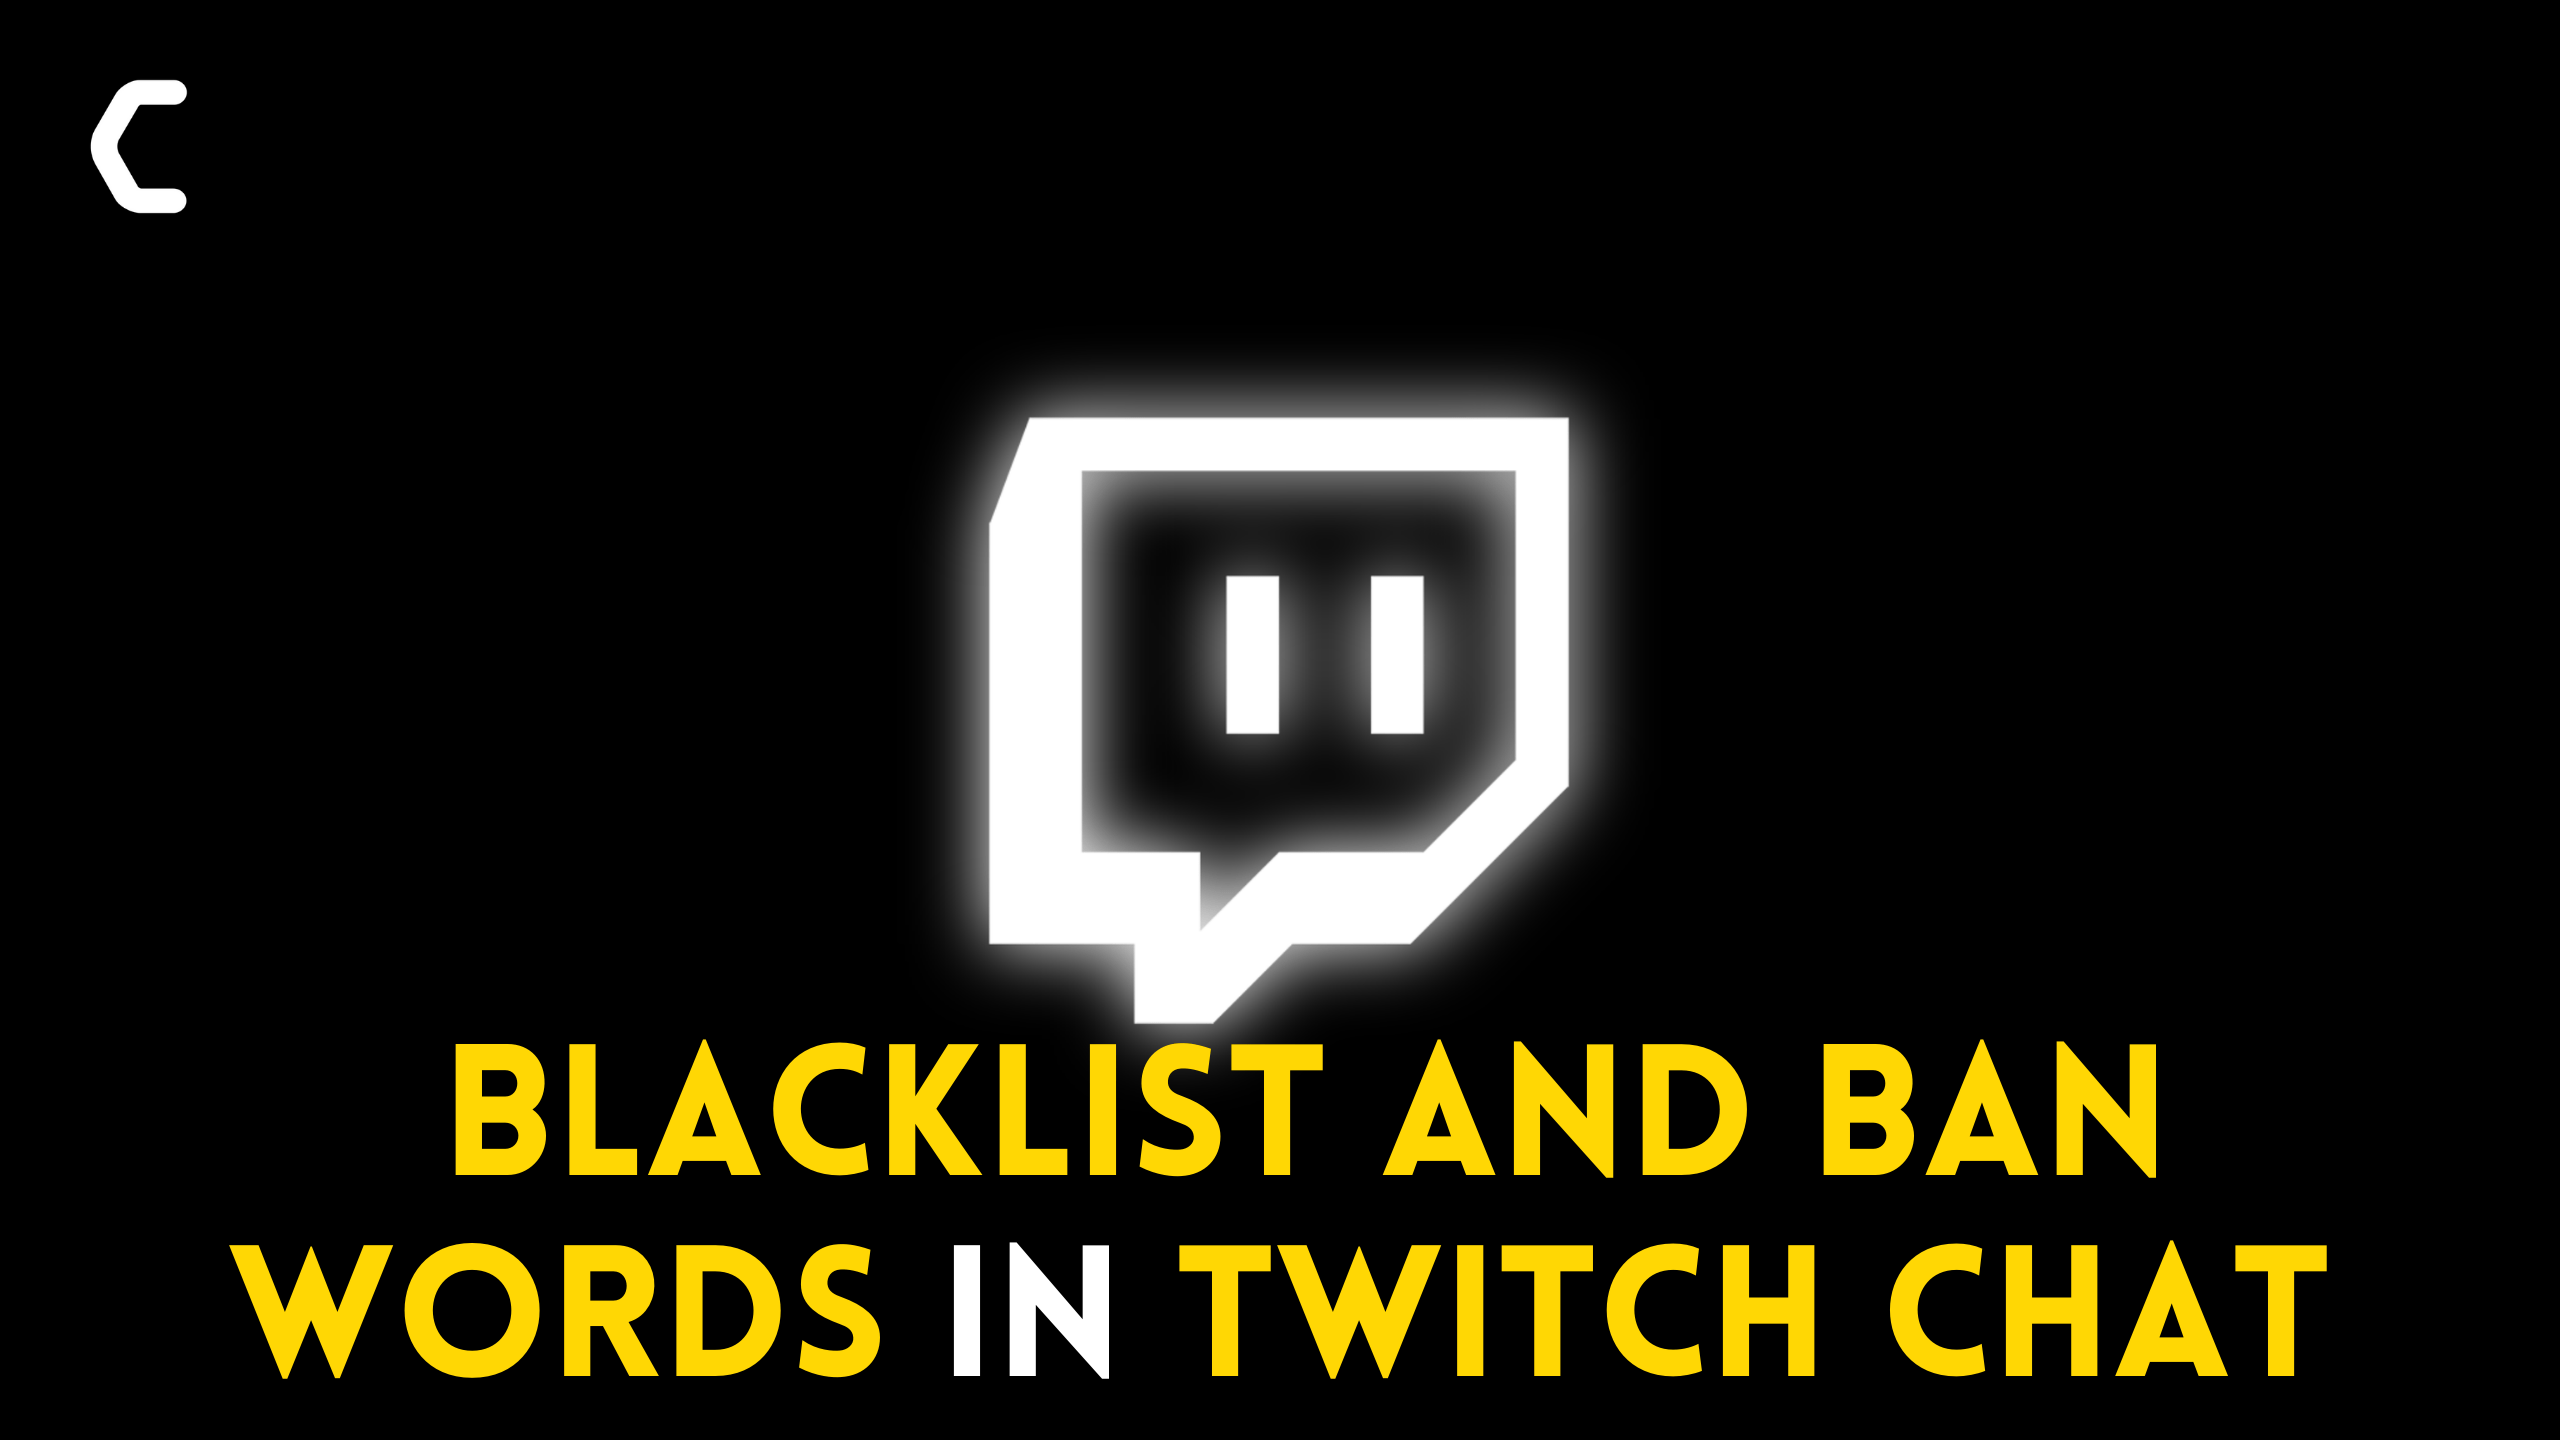 How To Blacklist and Ban Words in Twitch Chat